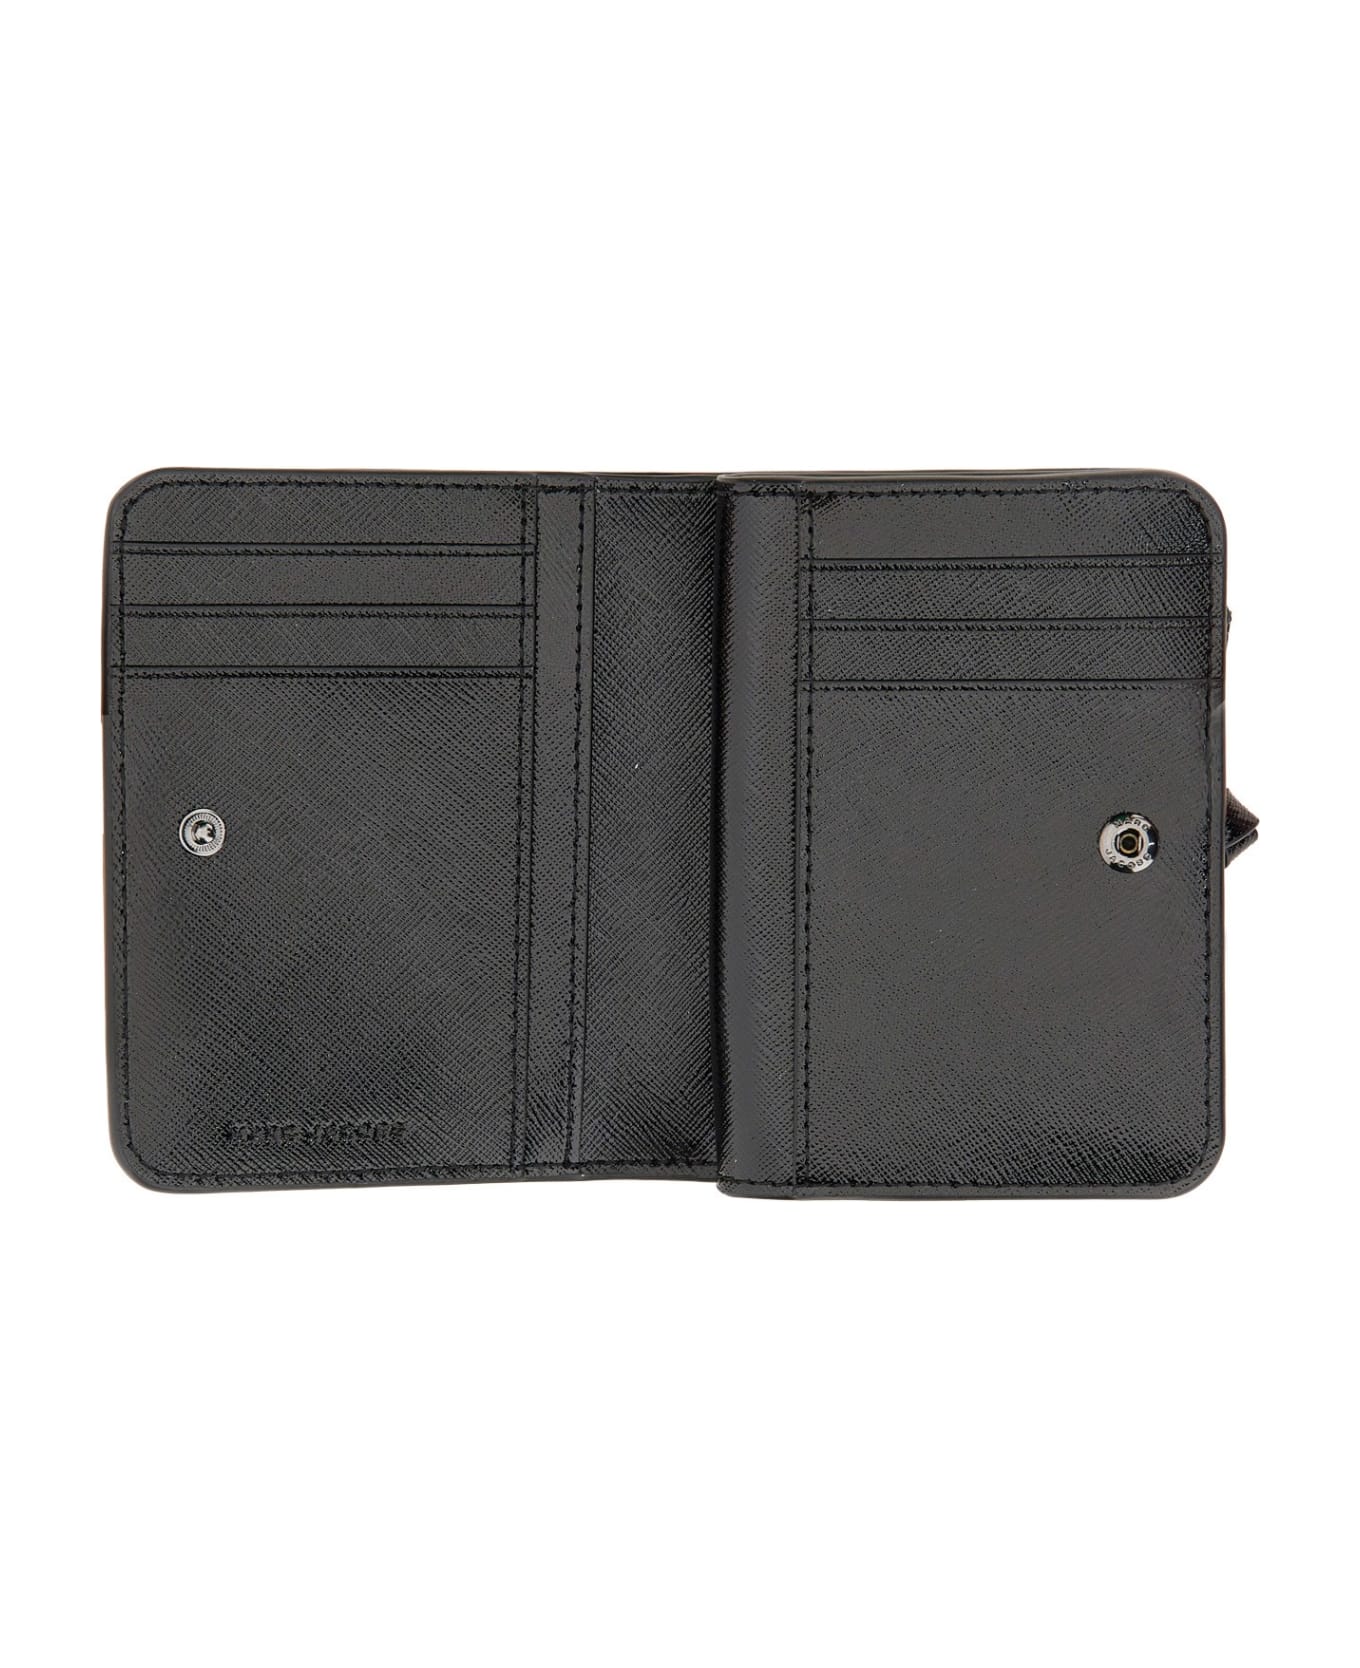 Marc Jacobs The Mini Compact Wallet In Black Leather - BLACK